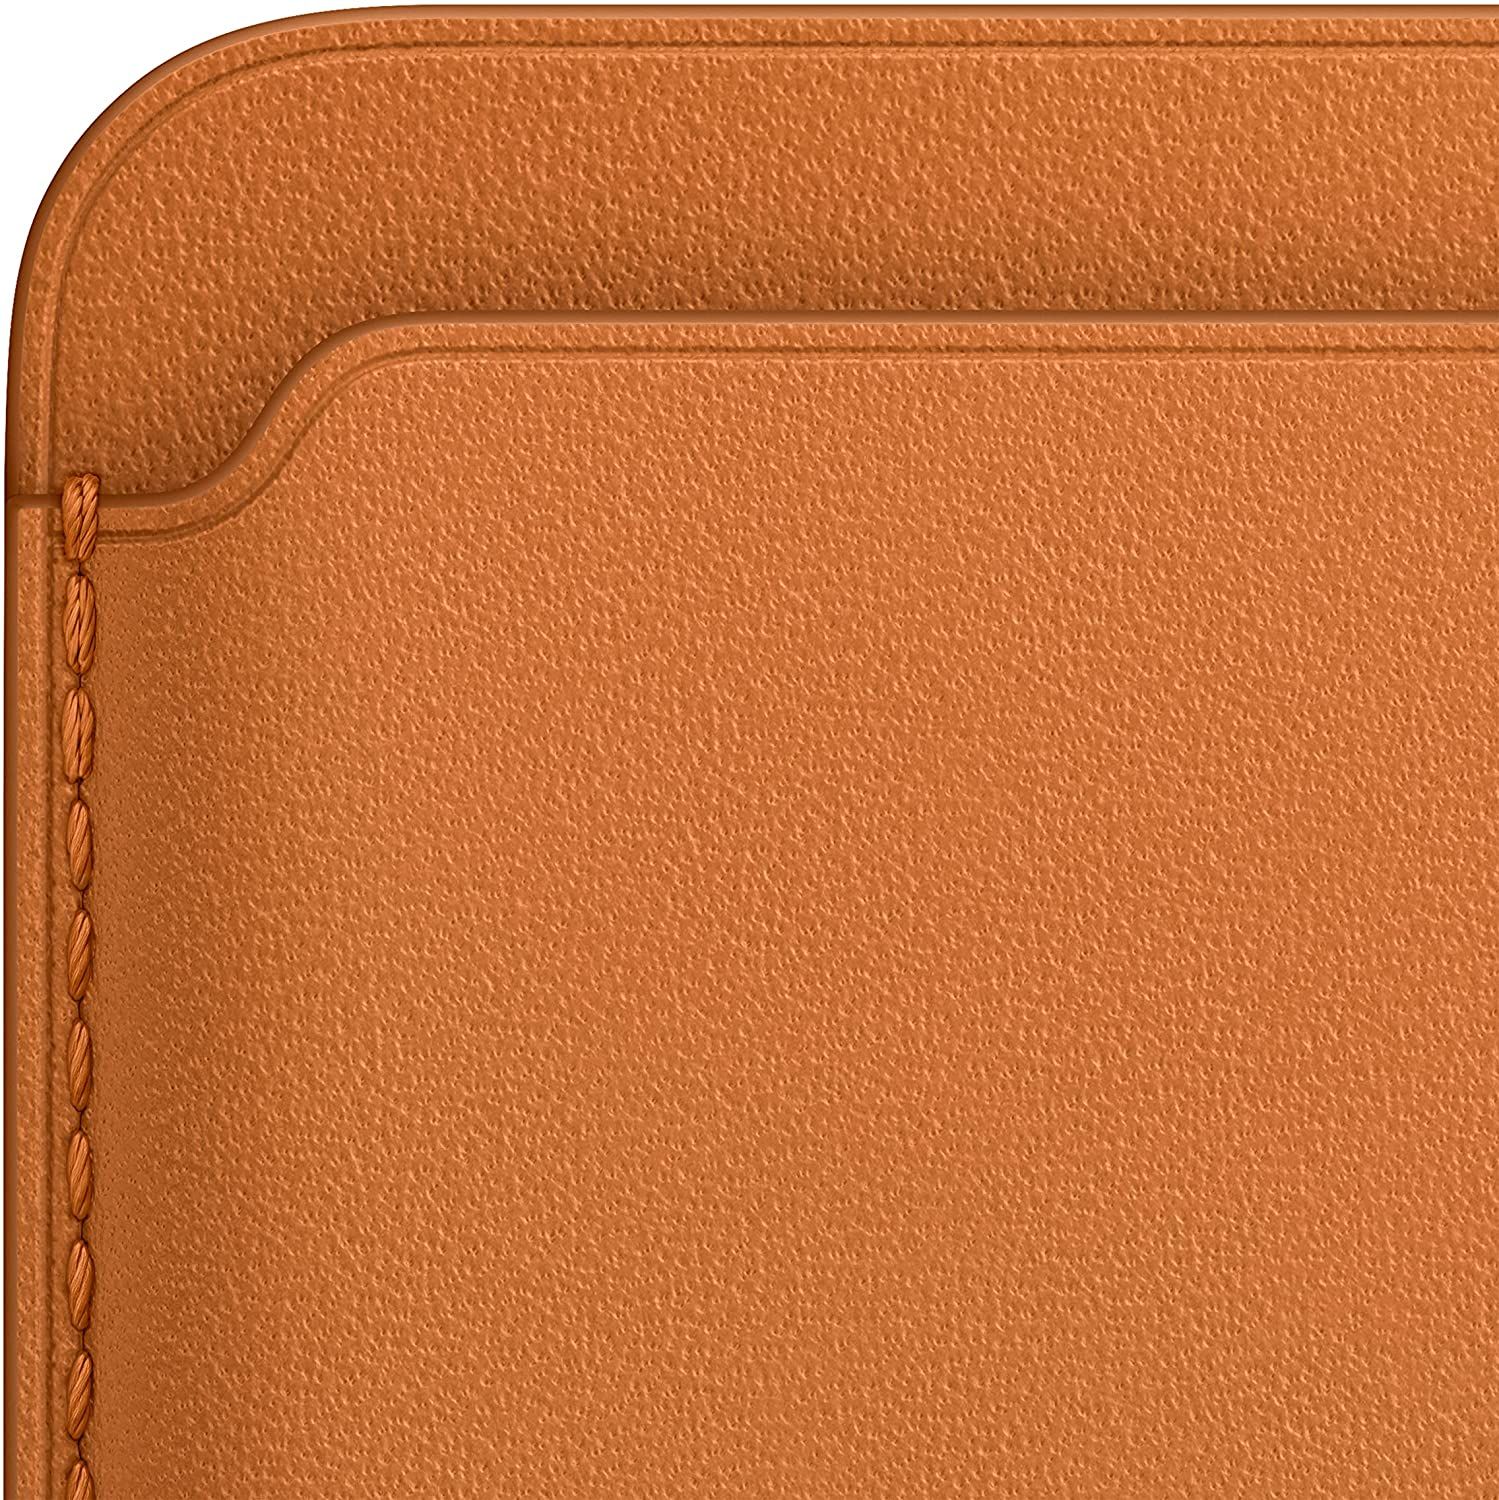 Apple Leather Wallet With MagSafe 2